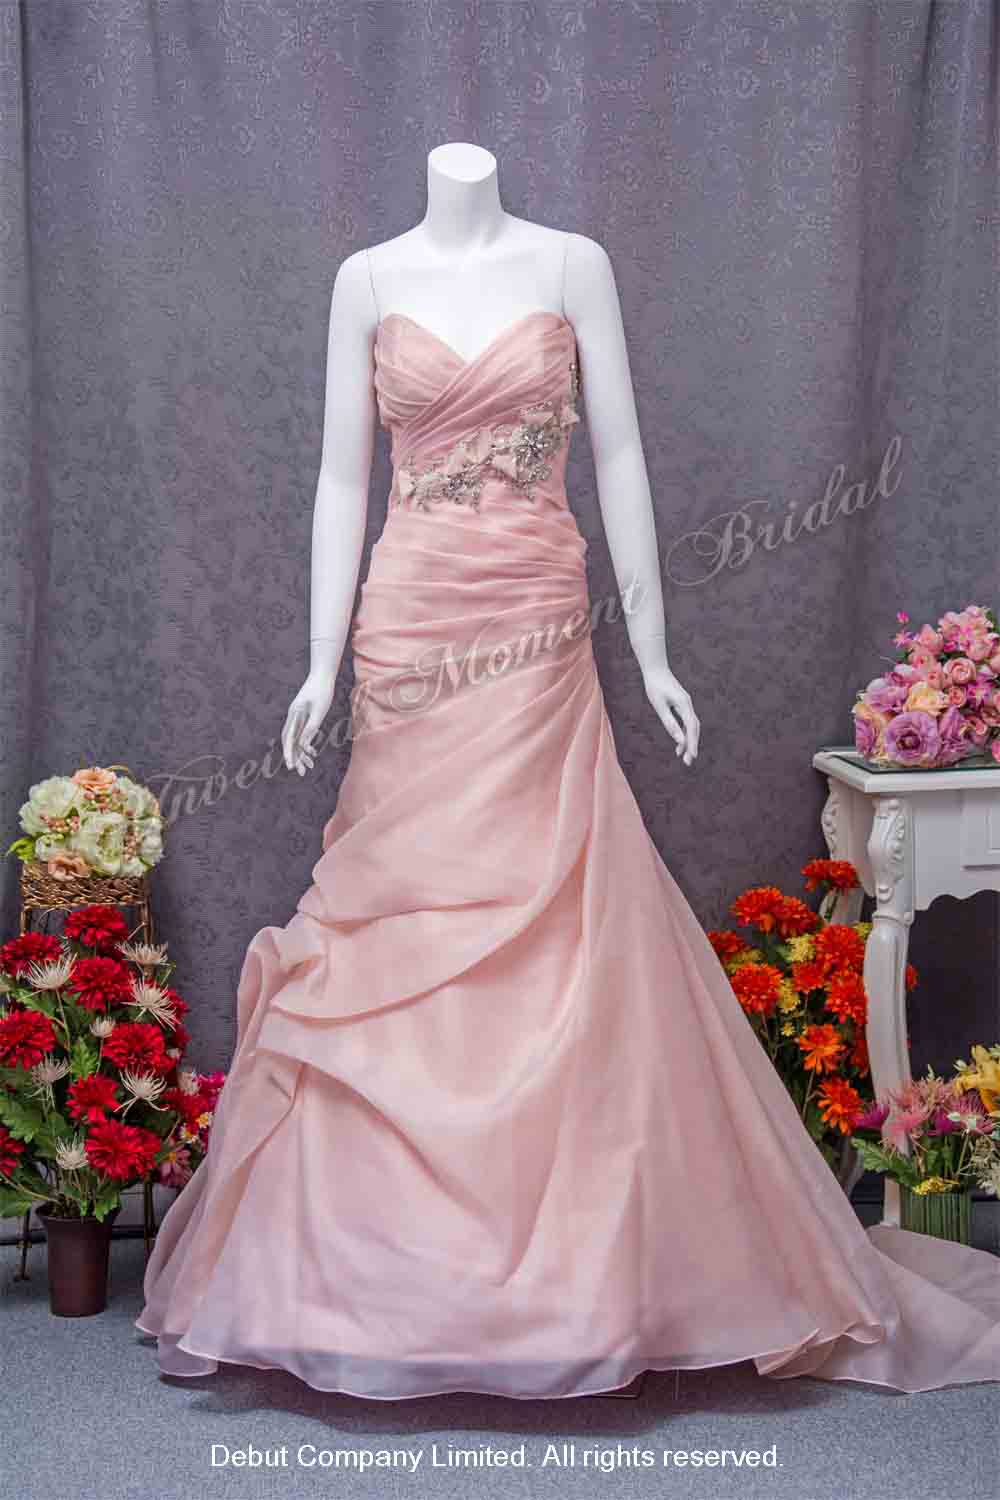 Bride in strapless, sweetheart neckline, trumpet dusty pink evening gown with embellishments on the pleated bodice and a court train 無肩帶, 心形胸, 釘珠花飾, 打褶上身, 長拖尾, 喇叭款淡粉色晚裝裙